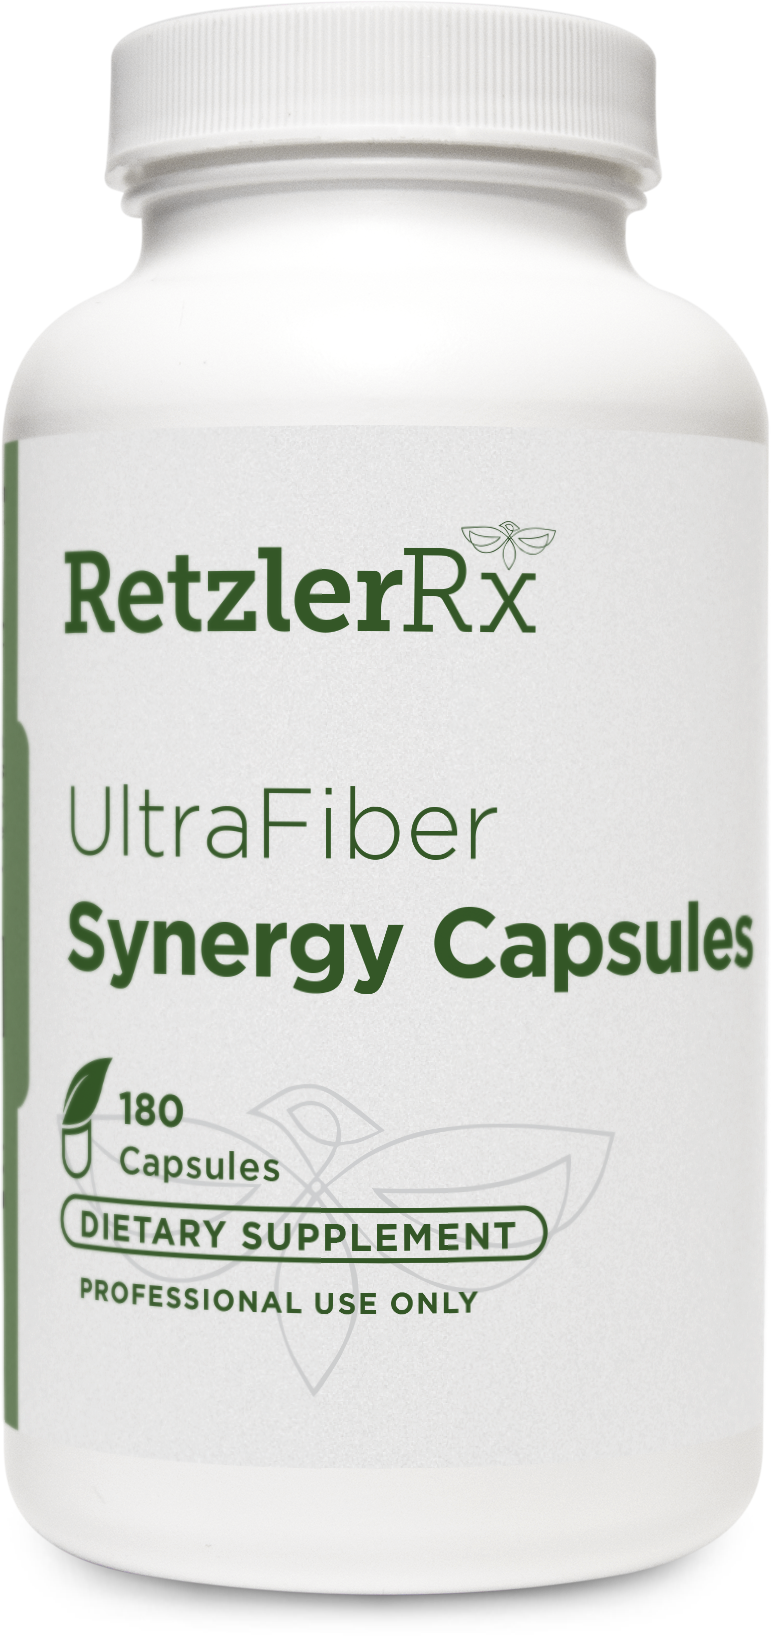 UltraFiber Synergy Capsules by Dr. RetzlerRx™ - (180 Capsules) 100% Natural and Soluble Propolmannan Fiber